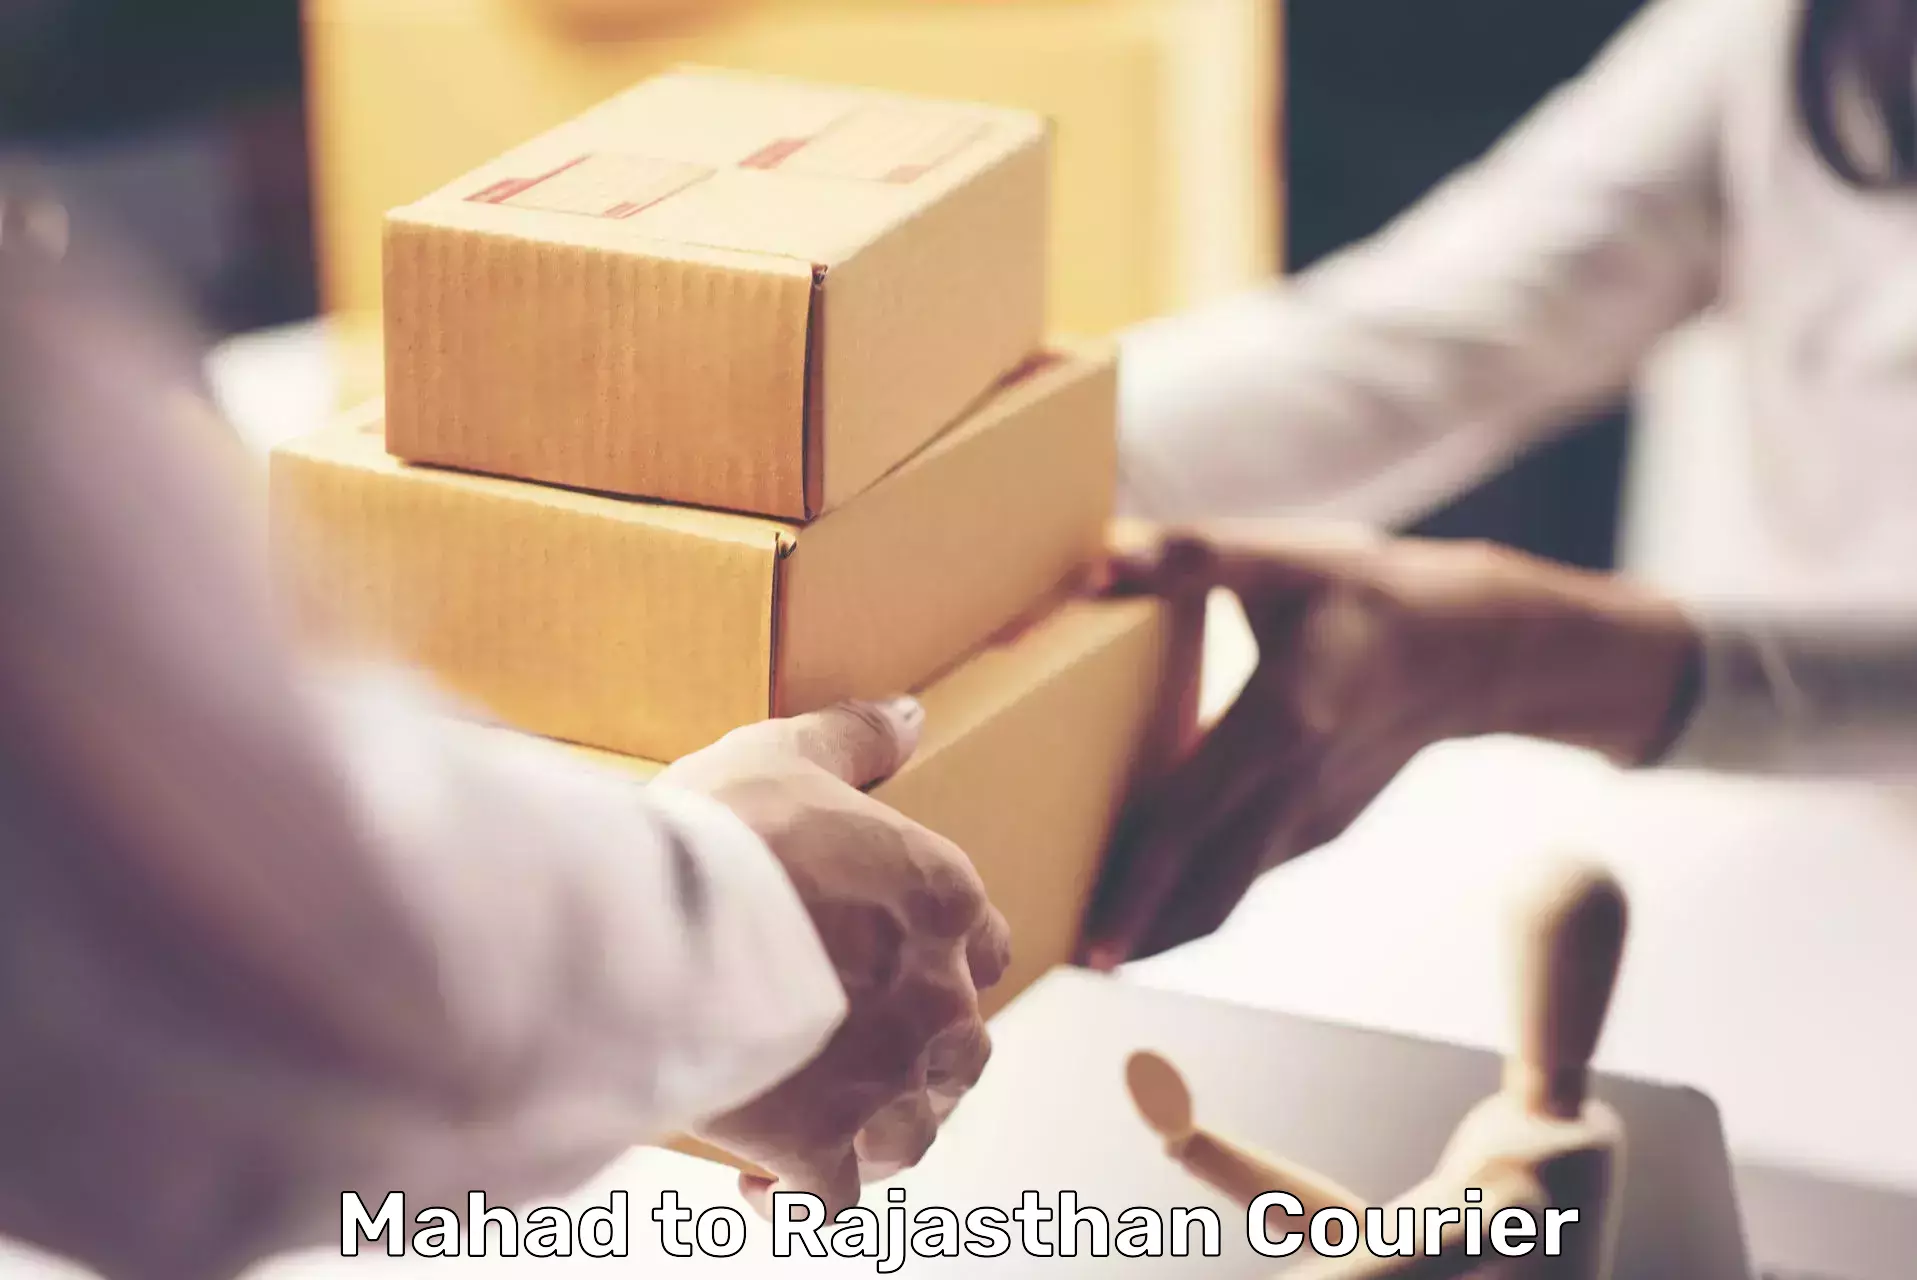 Personalized courier experiences Mahad to Rajasthan